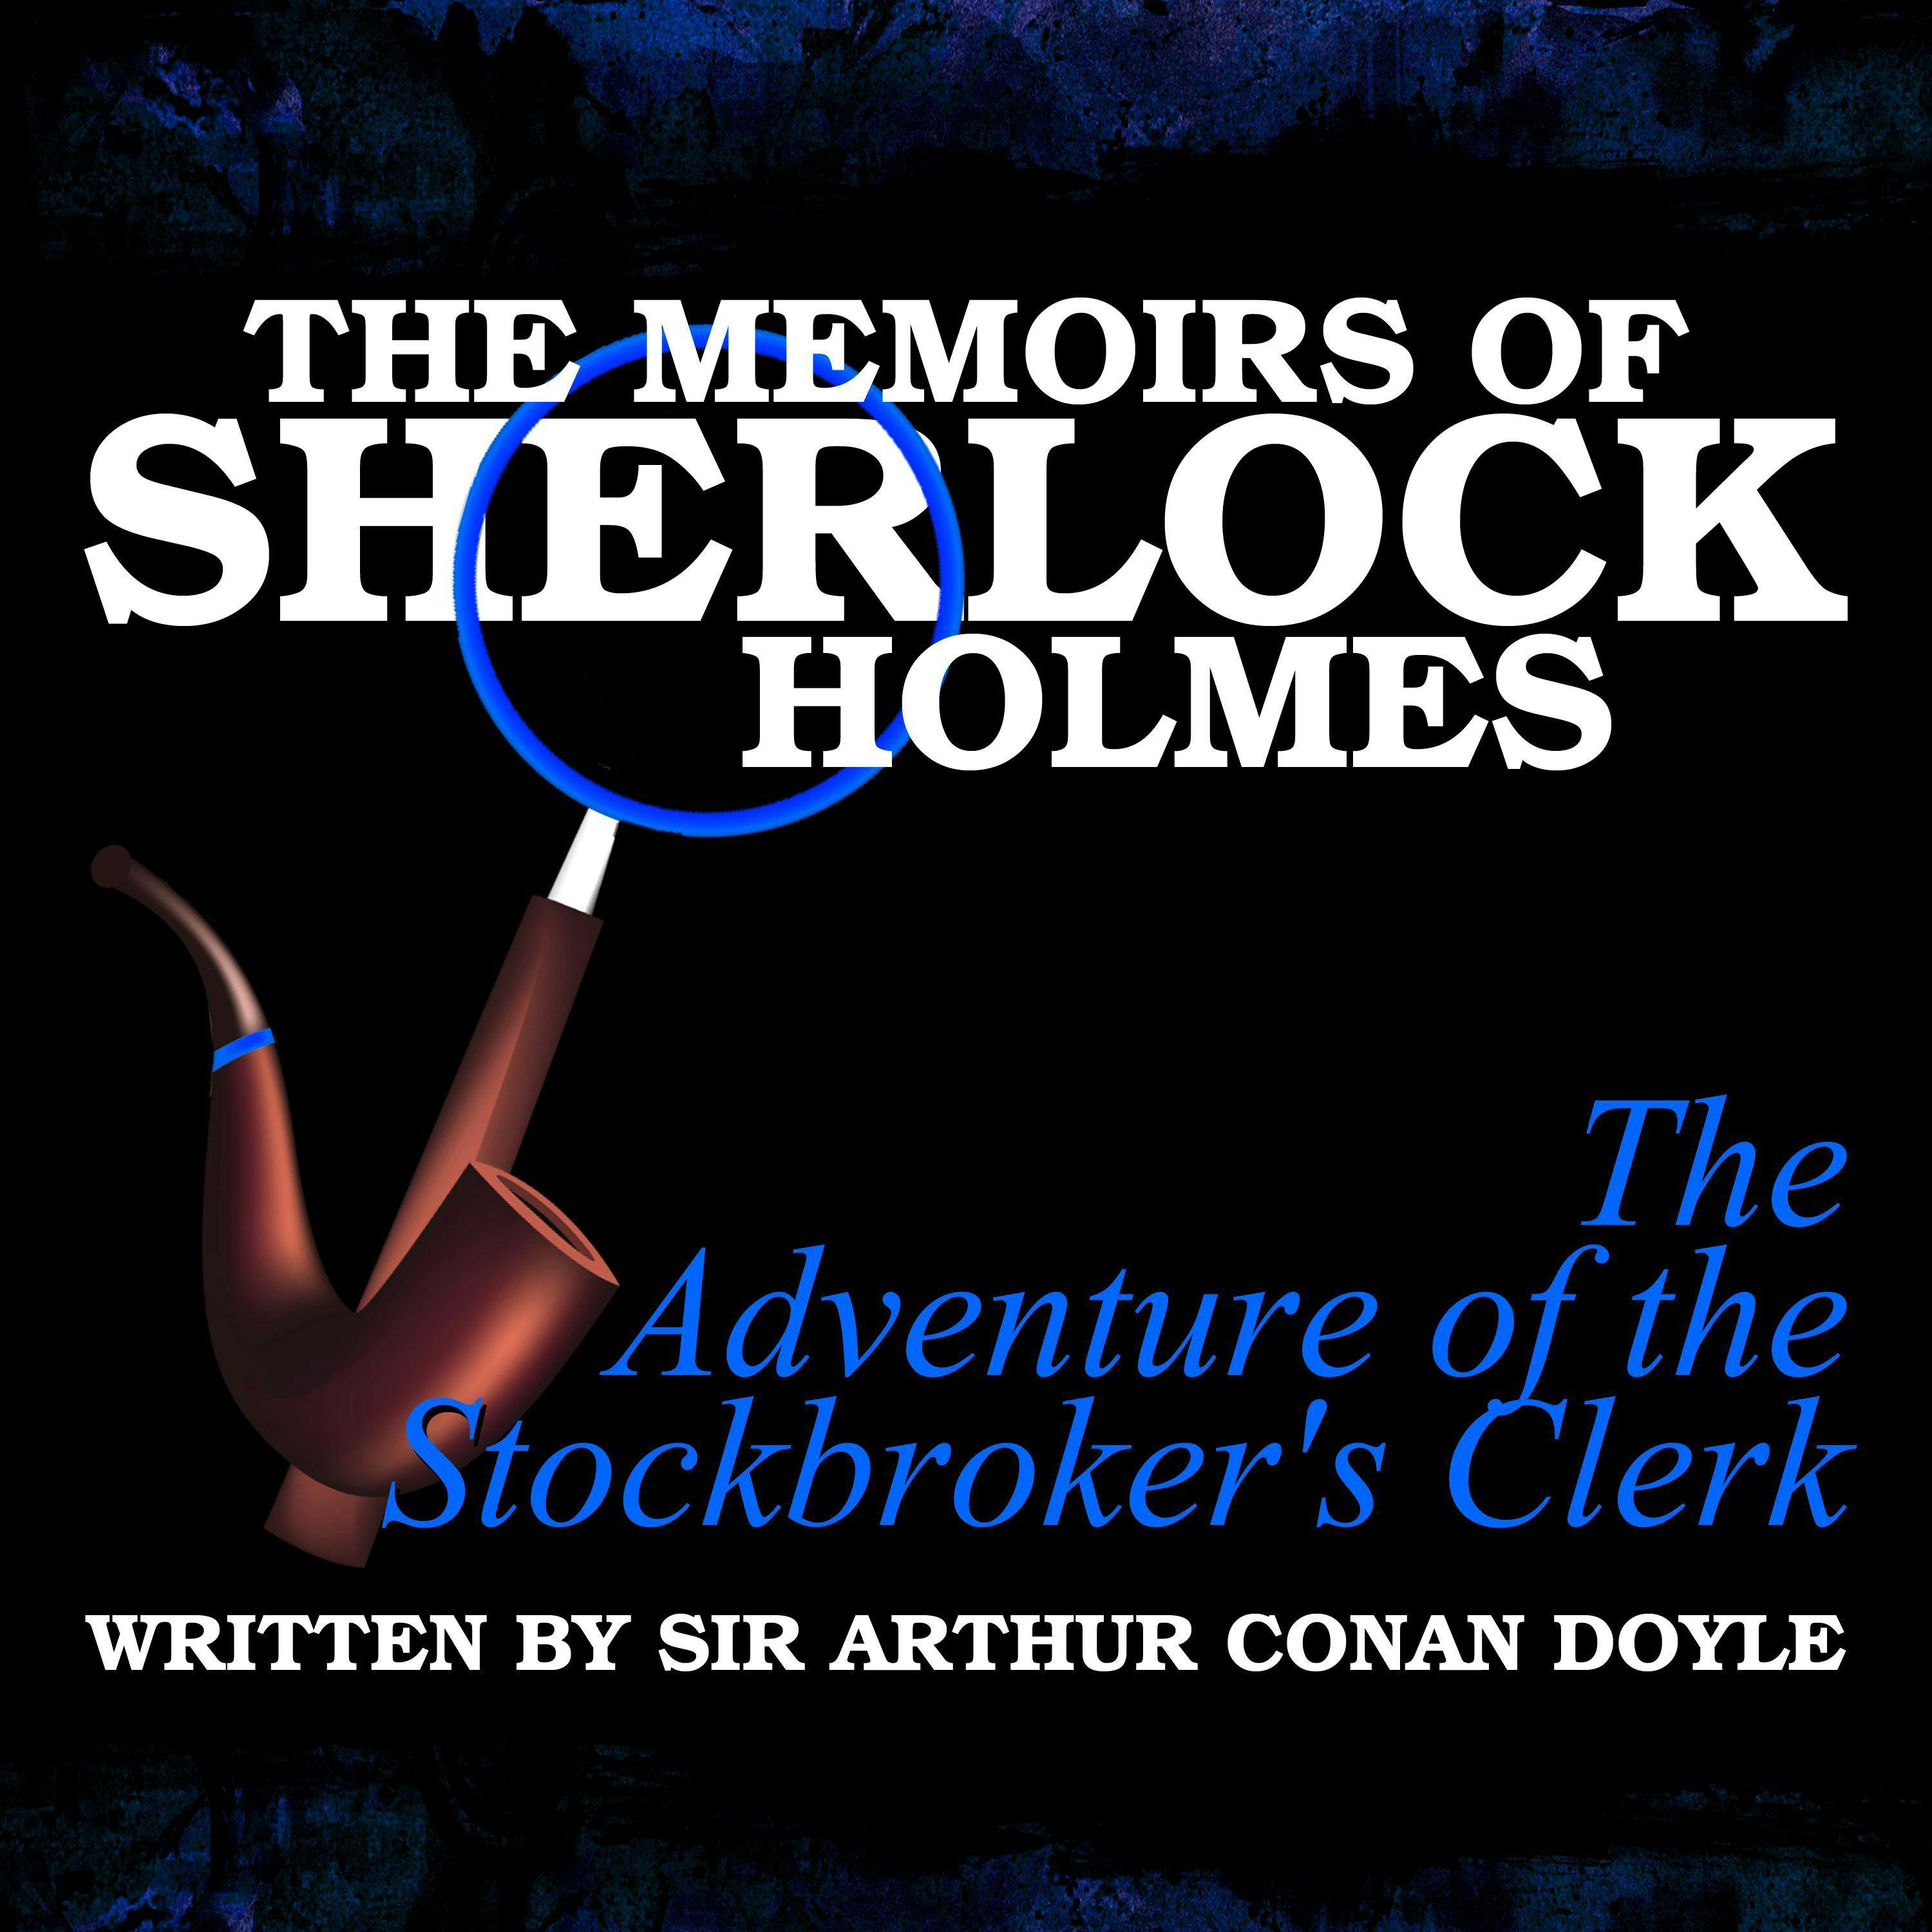 The Memoirs of Sherlock Holmes: The Adventure of the Stockbroker's Clerk - undefined